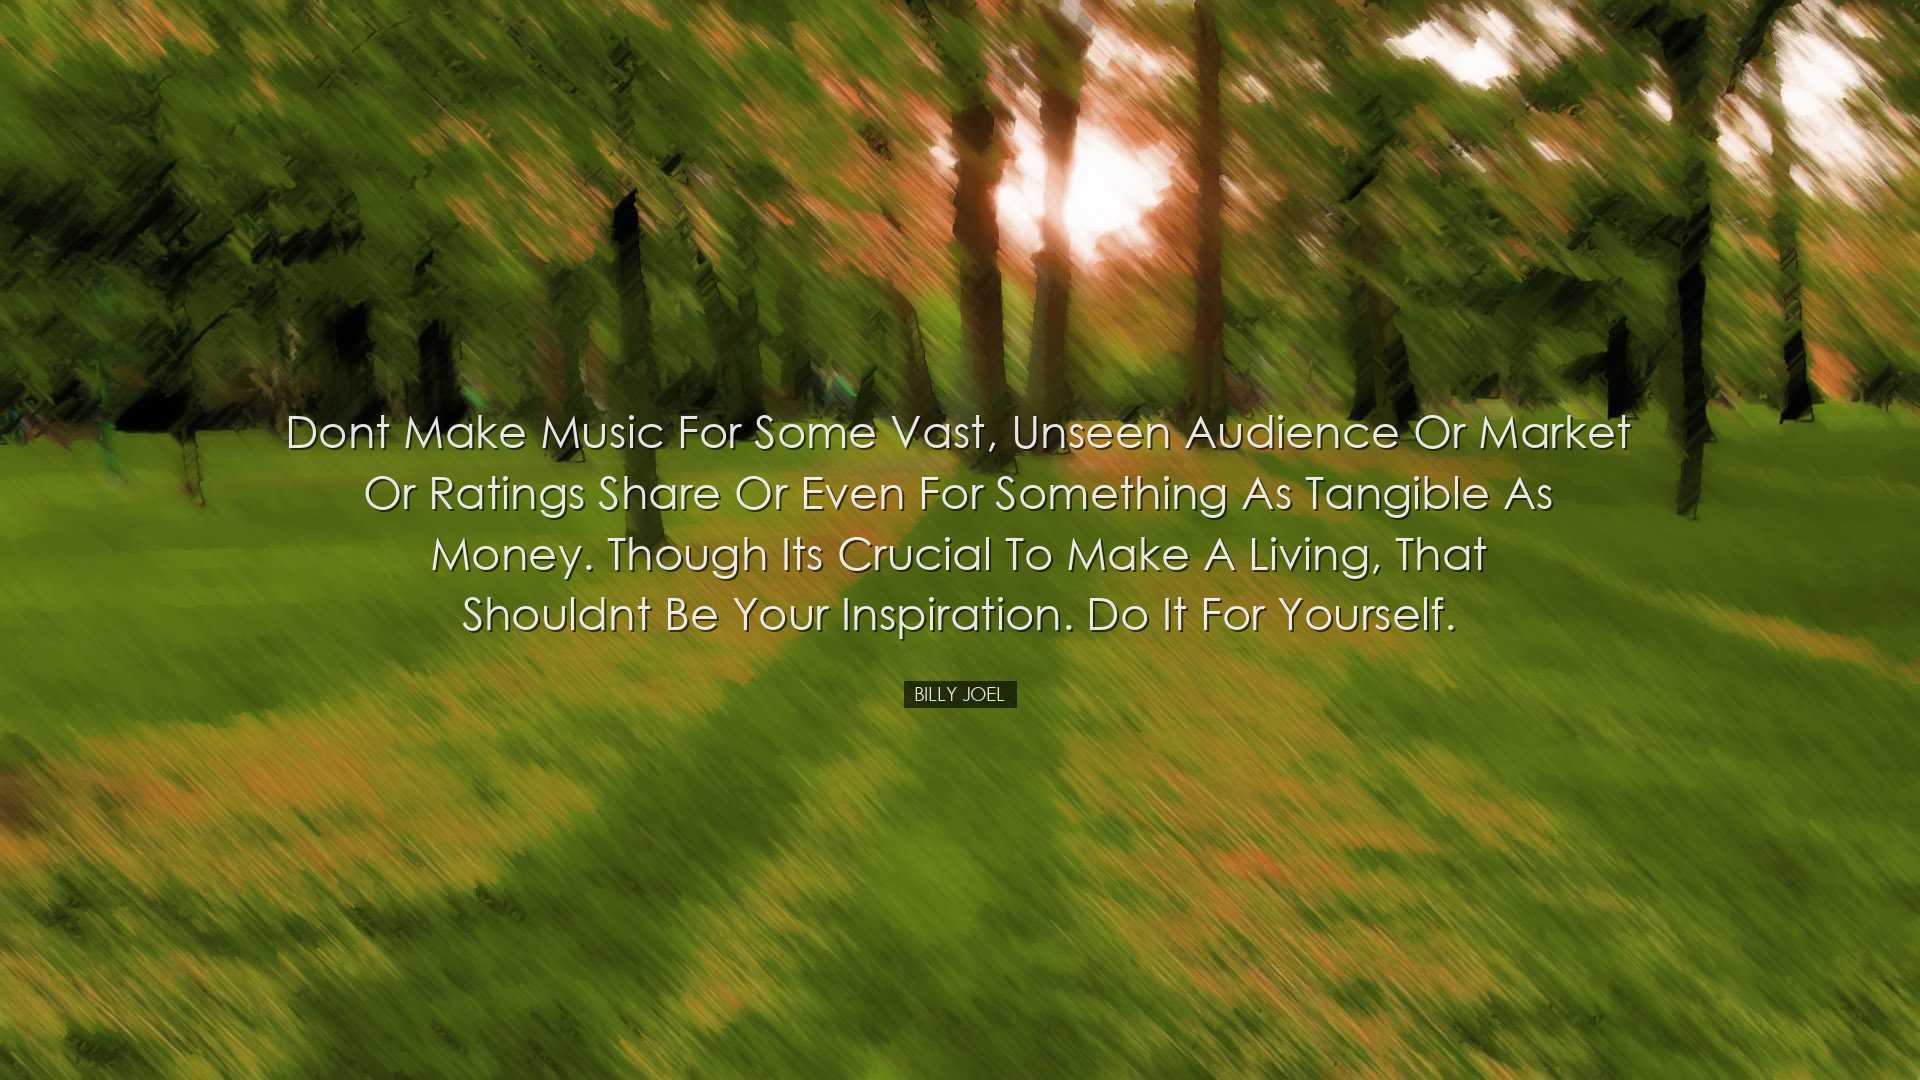 Dont make music for some vast, unseen audience or market or rating